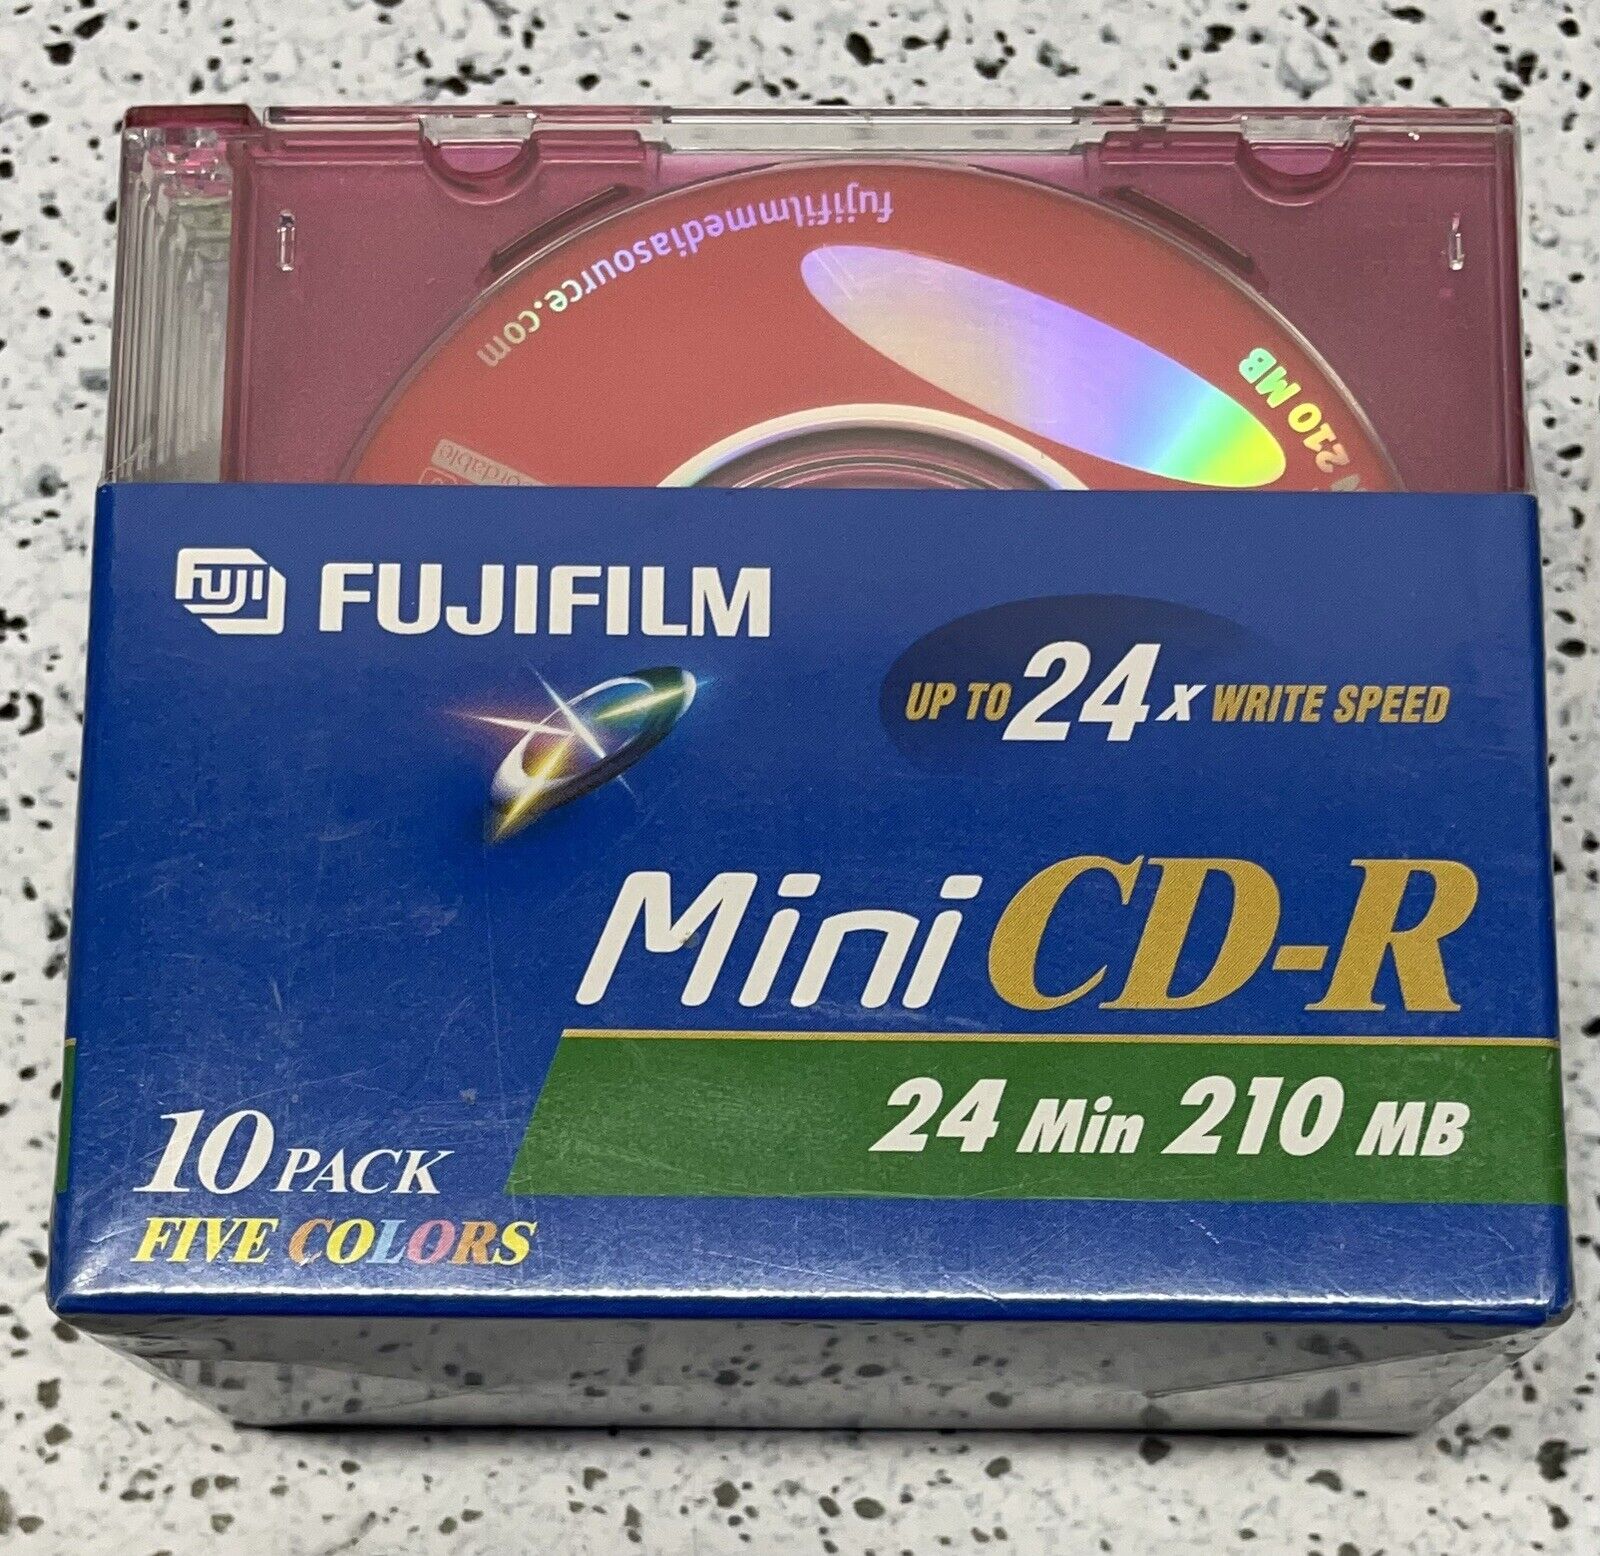 Fujifilm New Sealed Mini CD-R 24 Minute 210MB Up to 24x Write Speed Pack of 10 